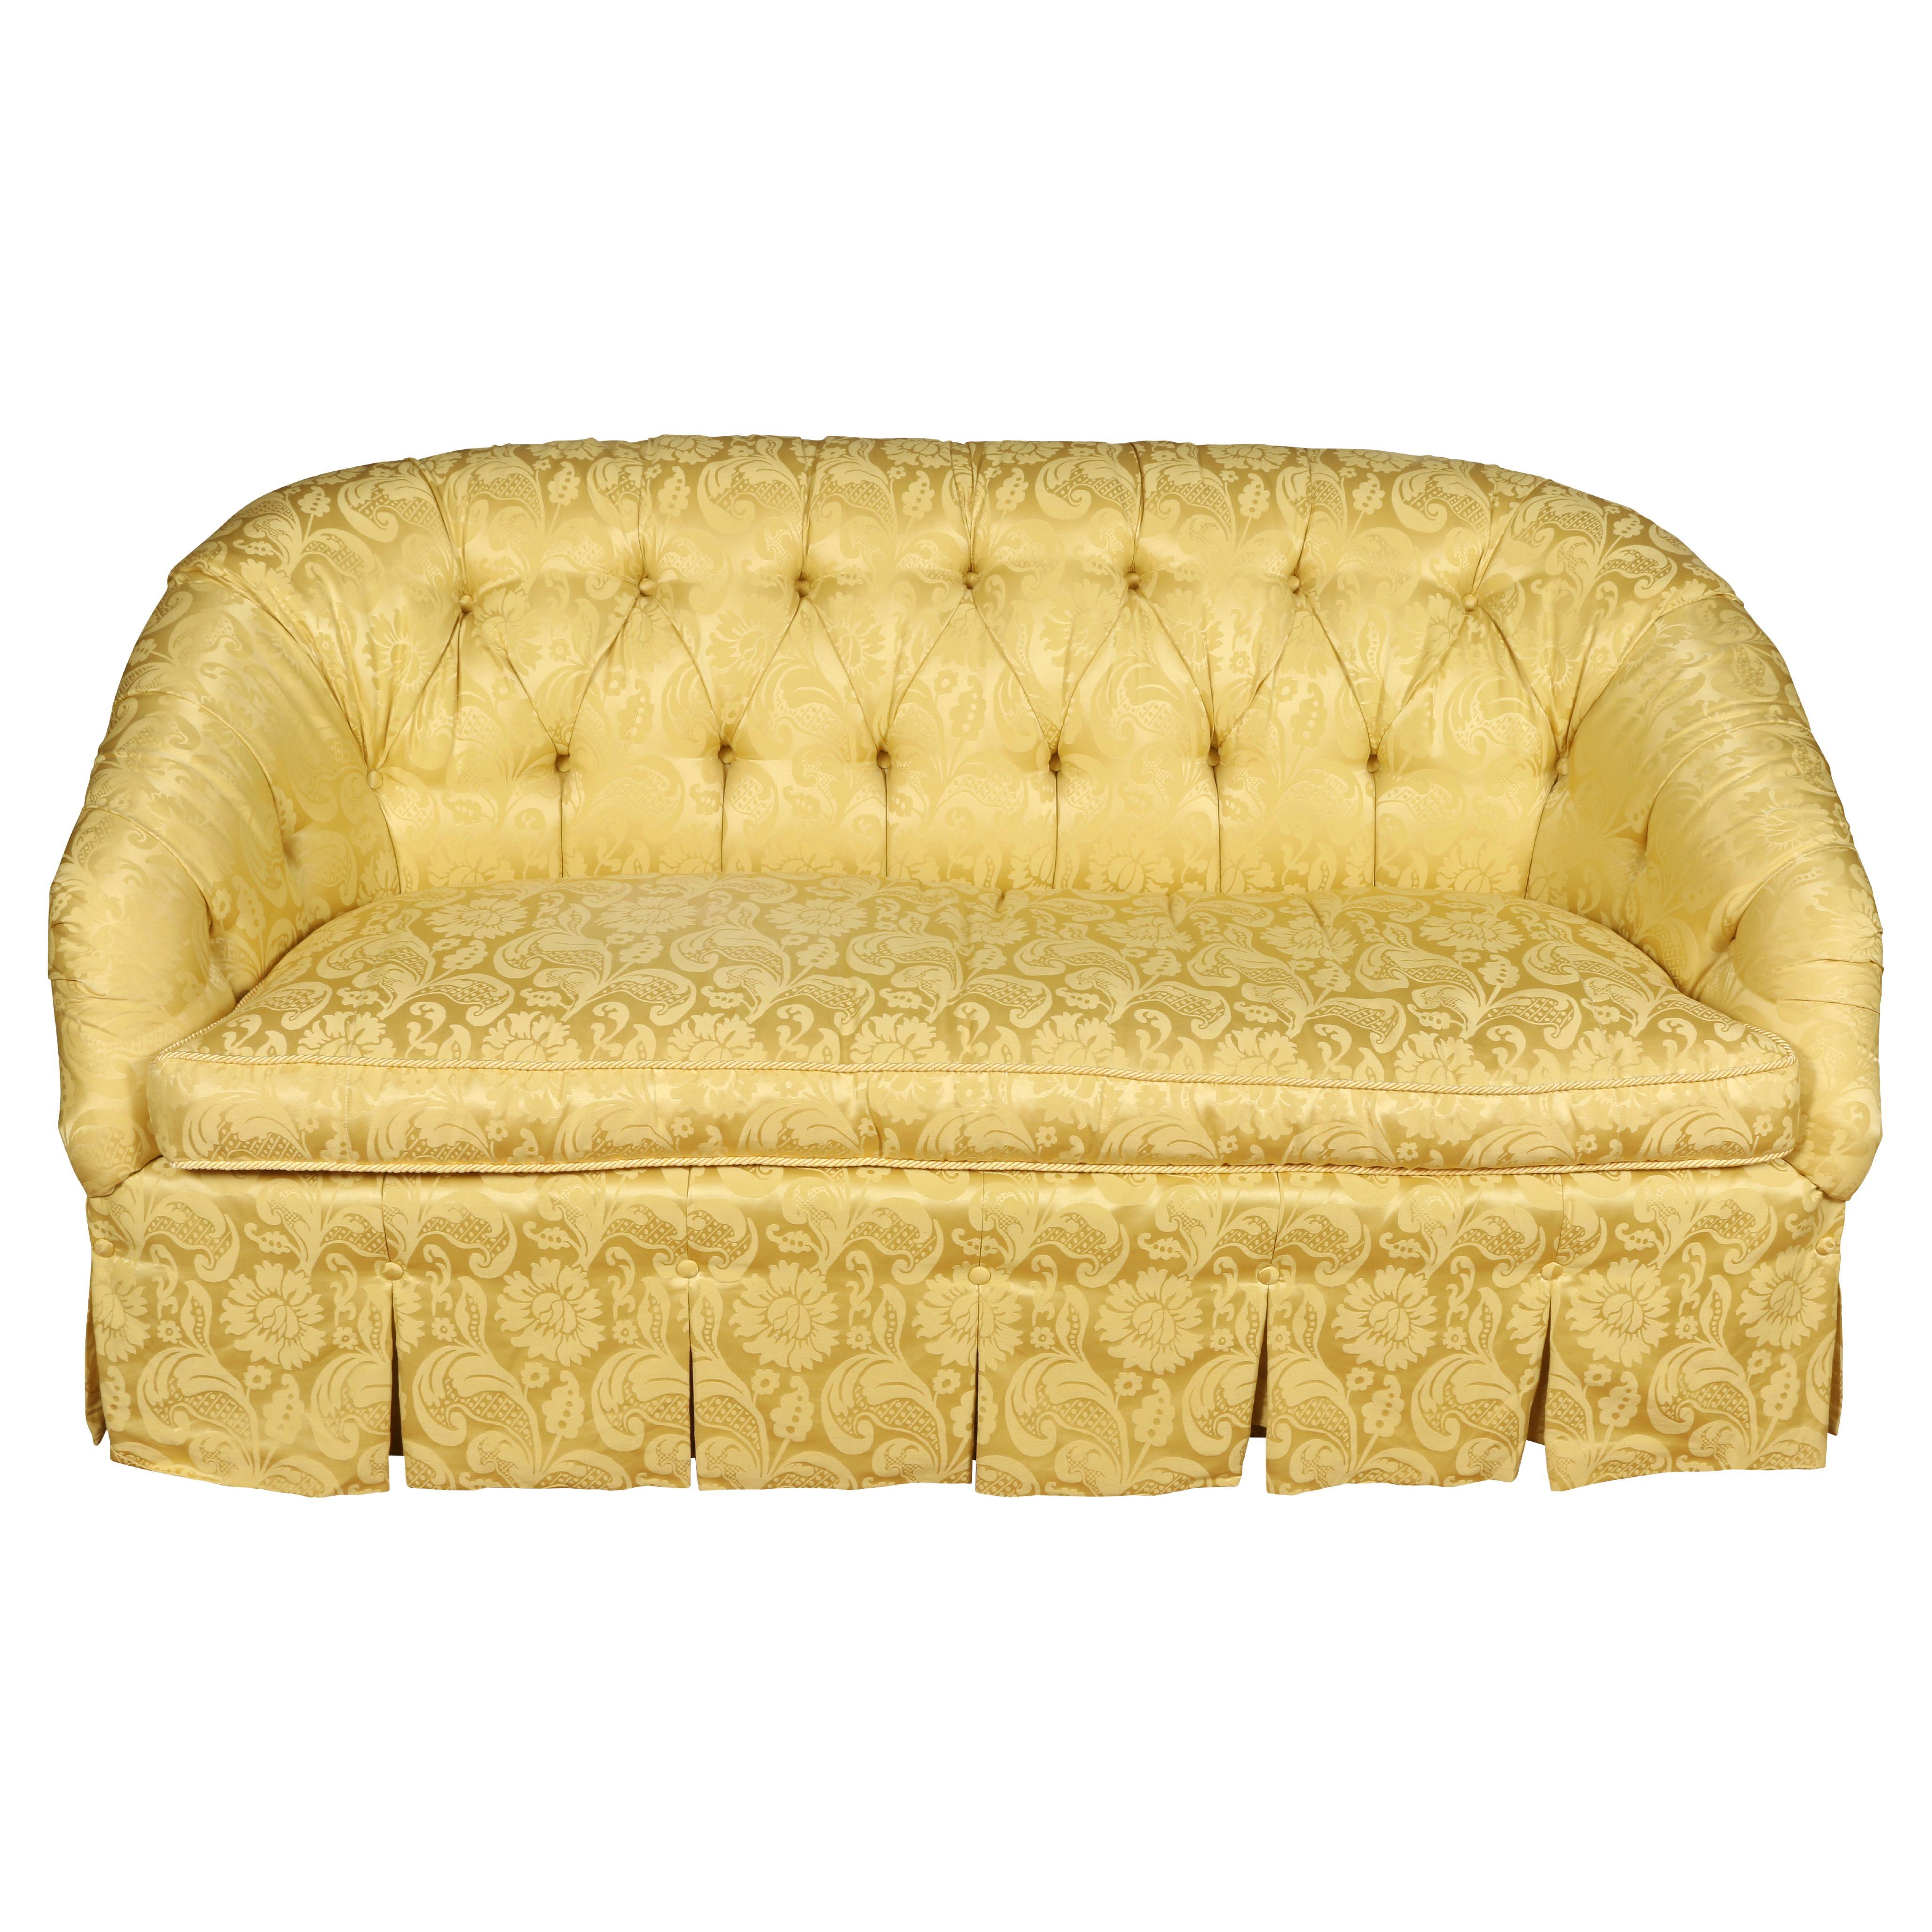 A Tufted Loveseat